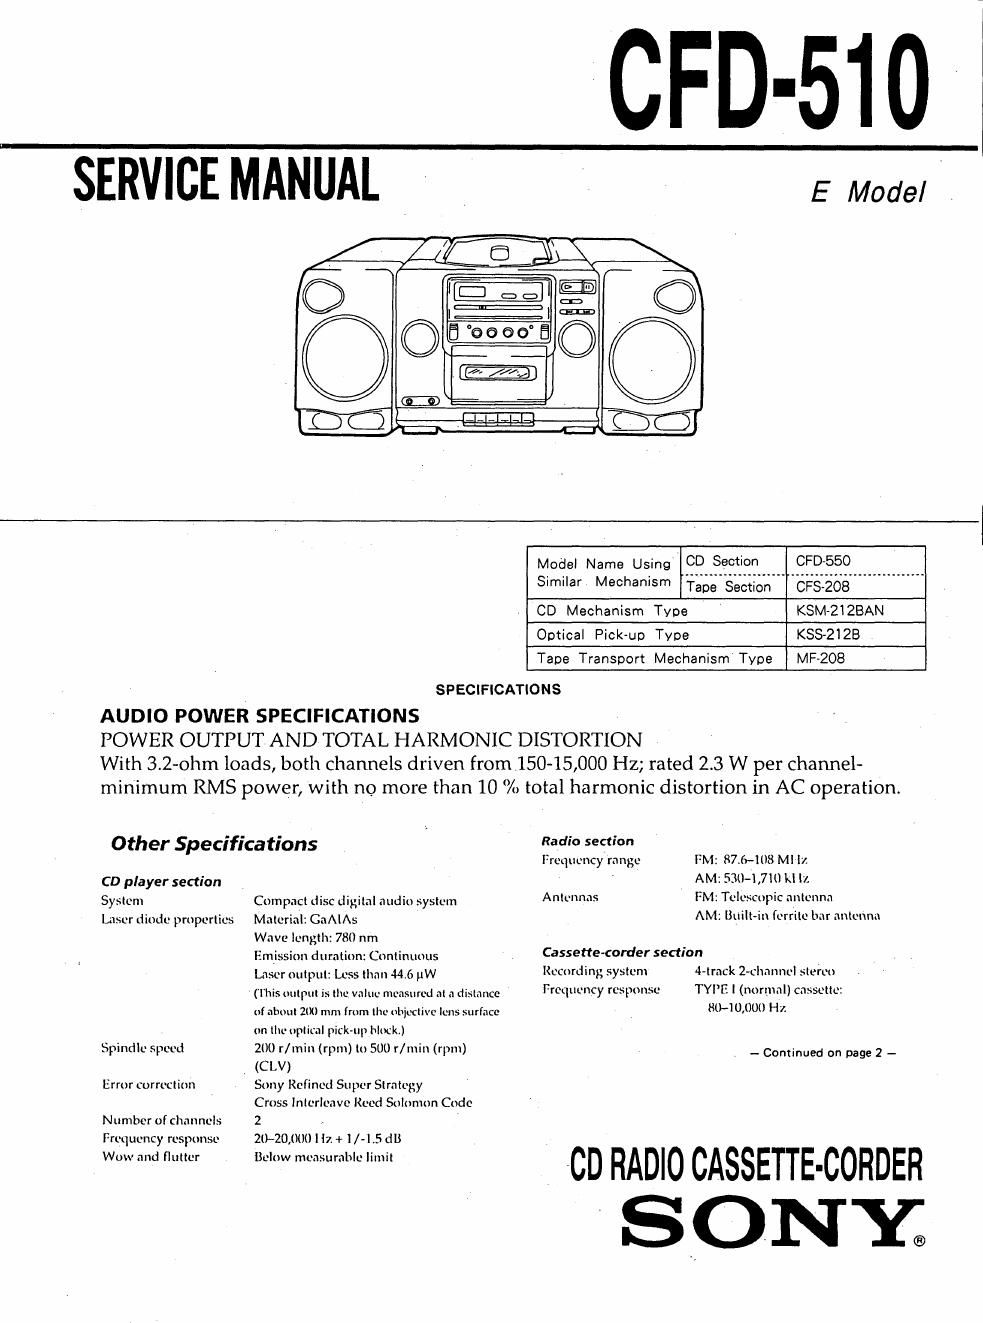 sony cfd 510 service manual